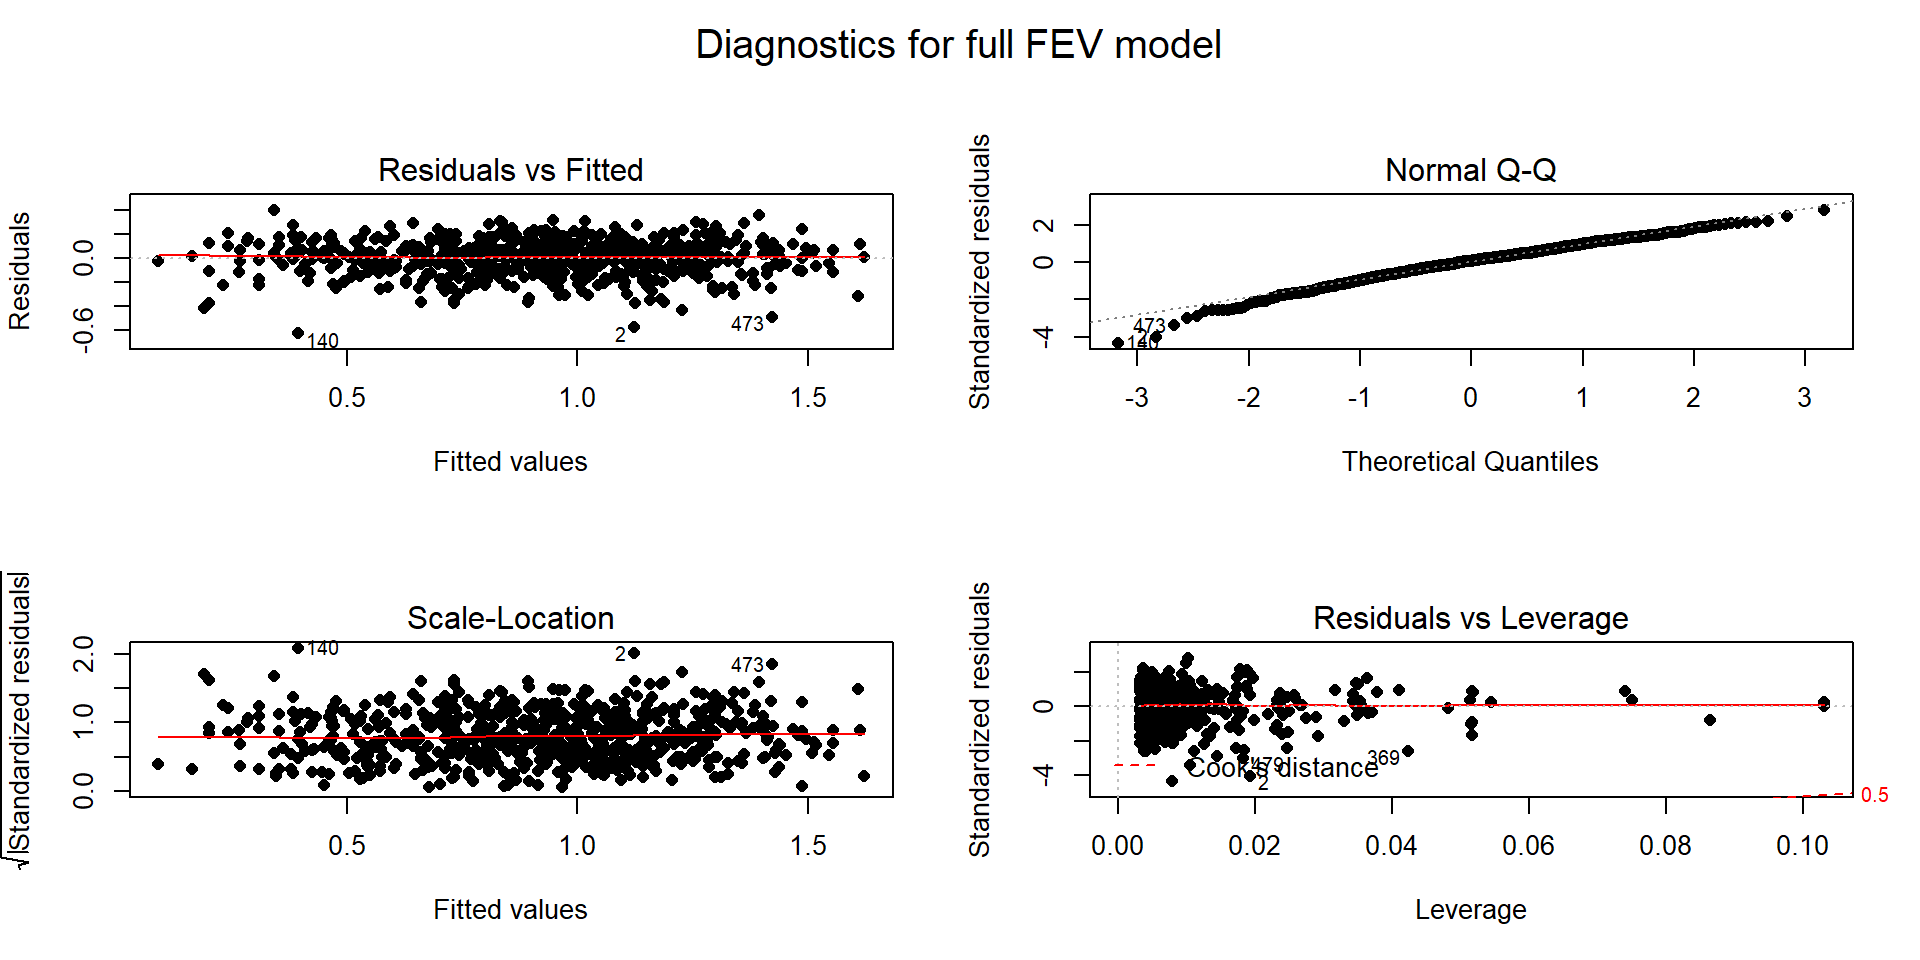 Diagnostics for the log(FEV) model that includes height, sex, and an interaction between age and smoking status (the full model).